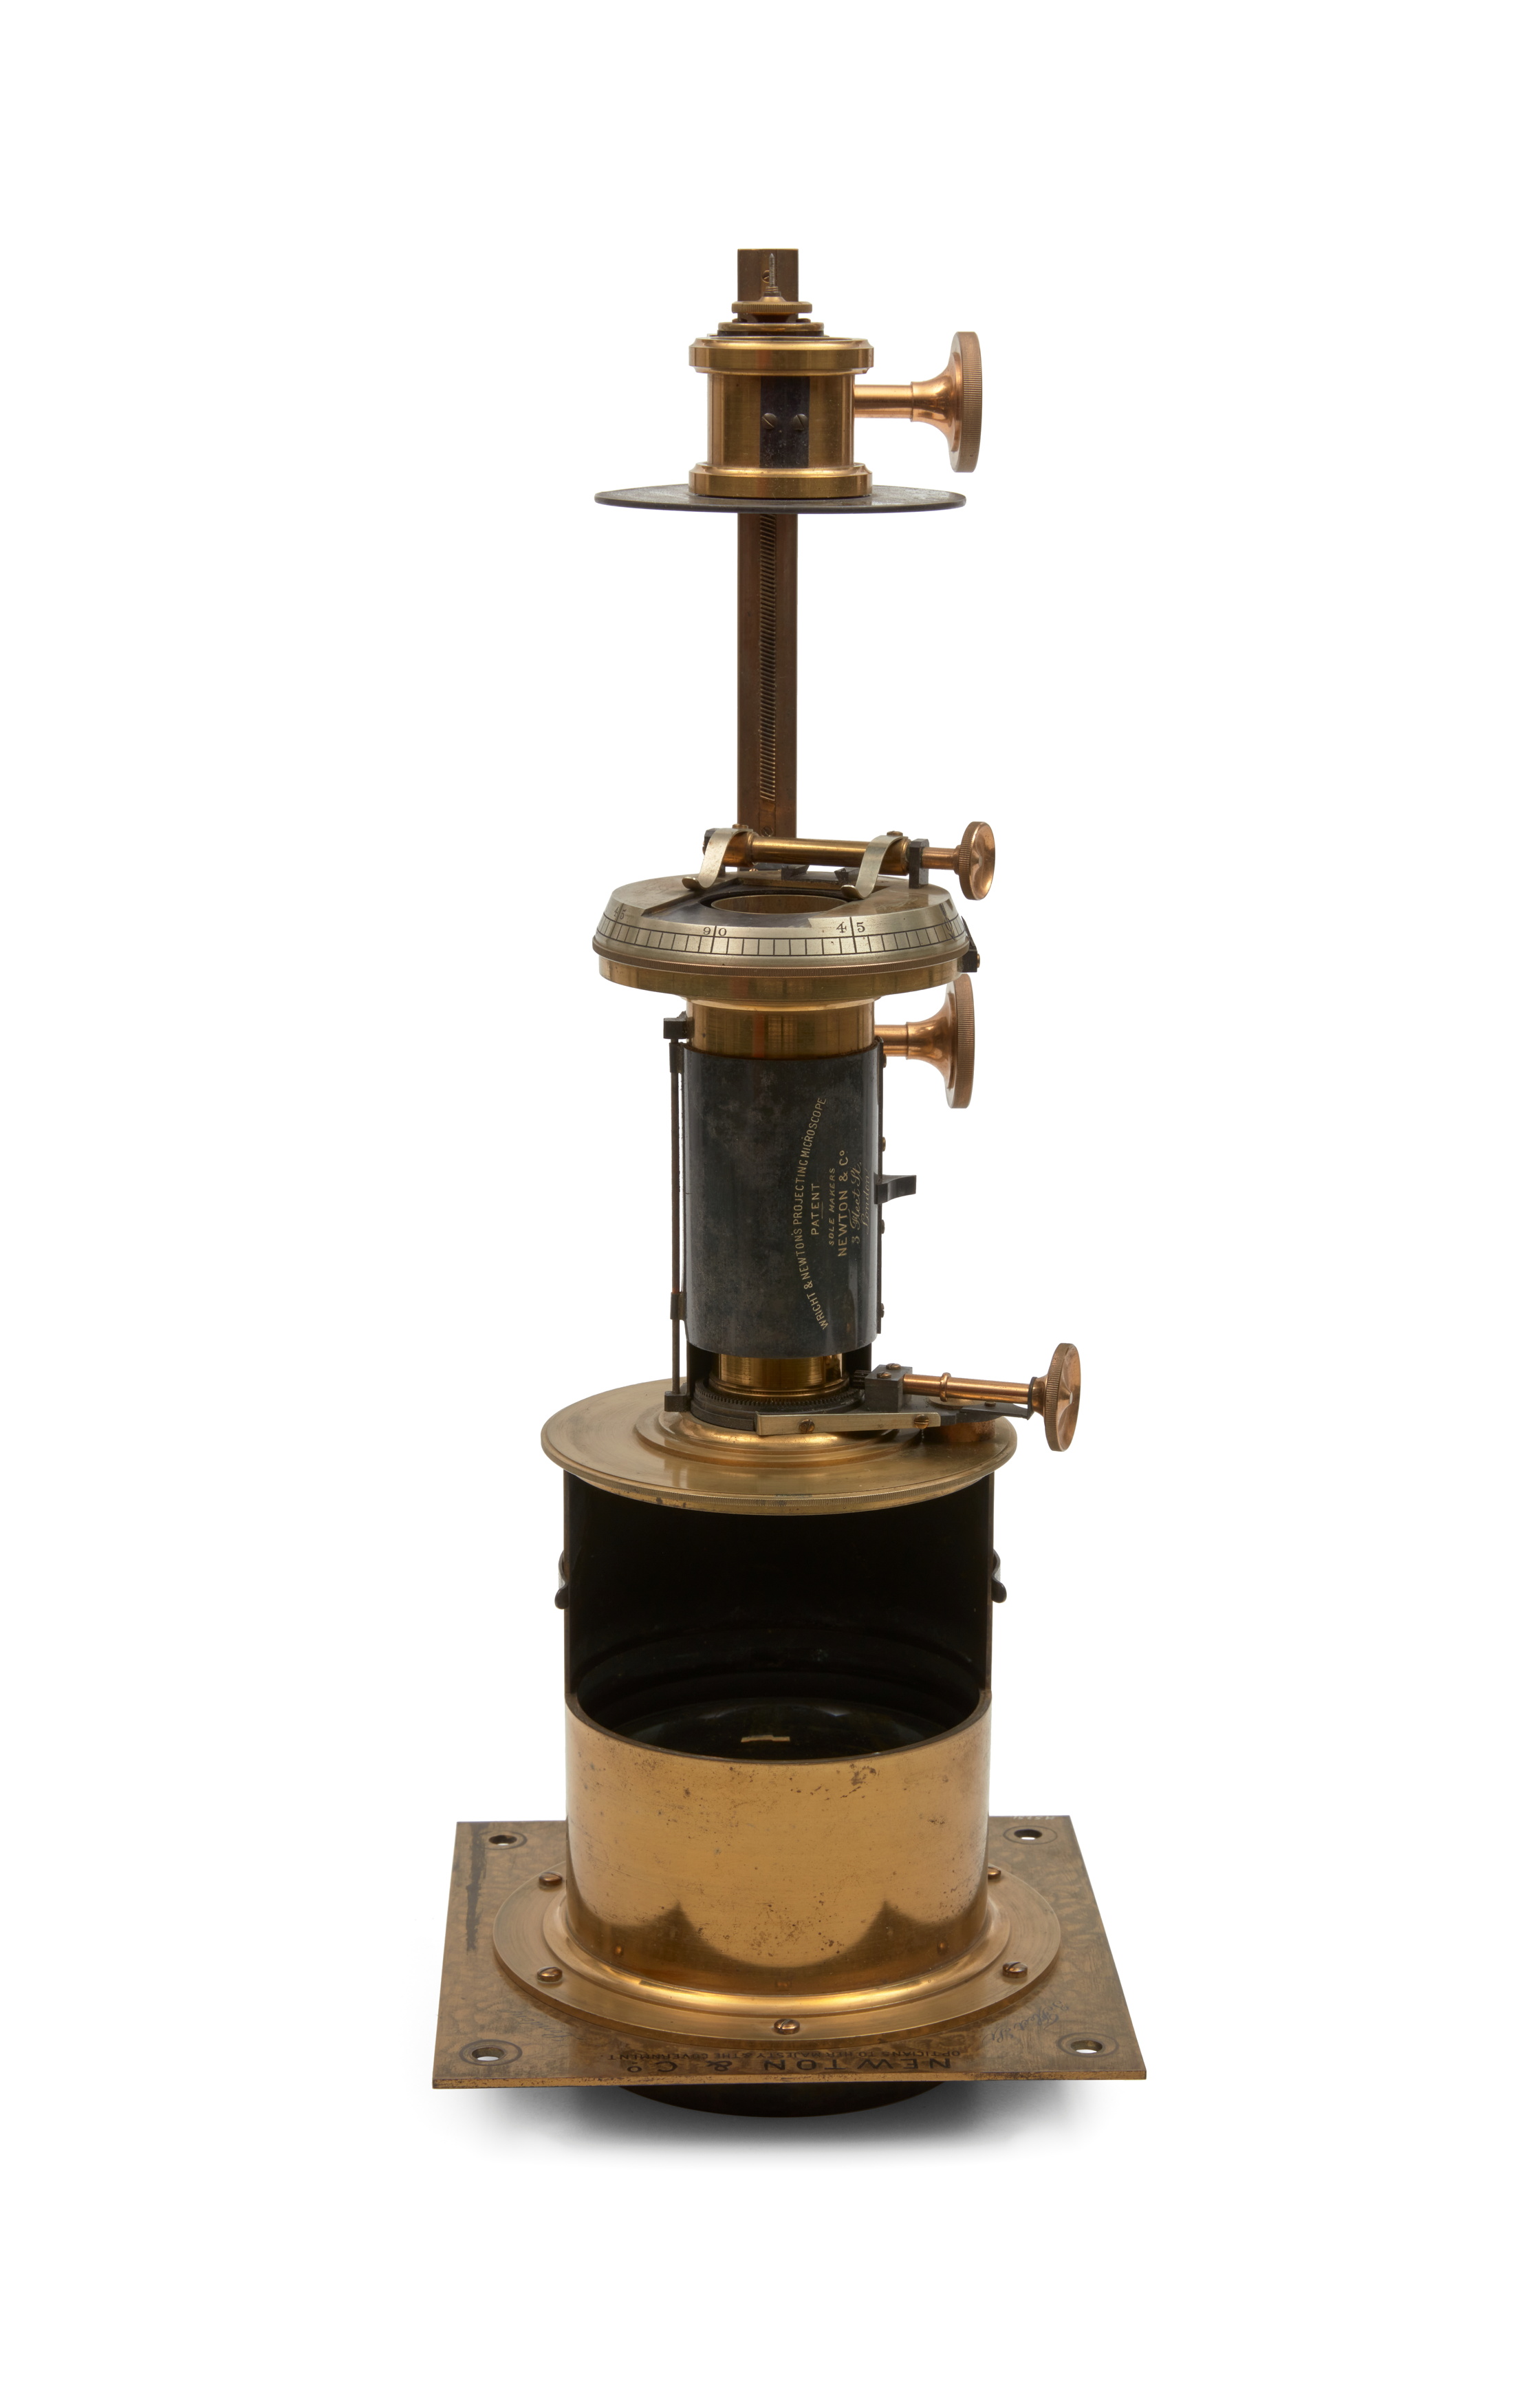 Projection microscope made by Newton & Co and used by Royal Society of New South Wales